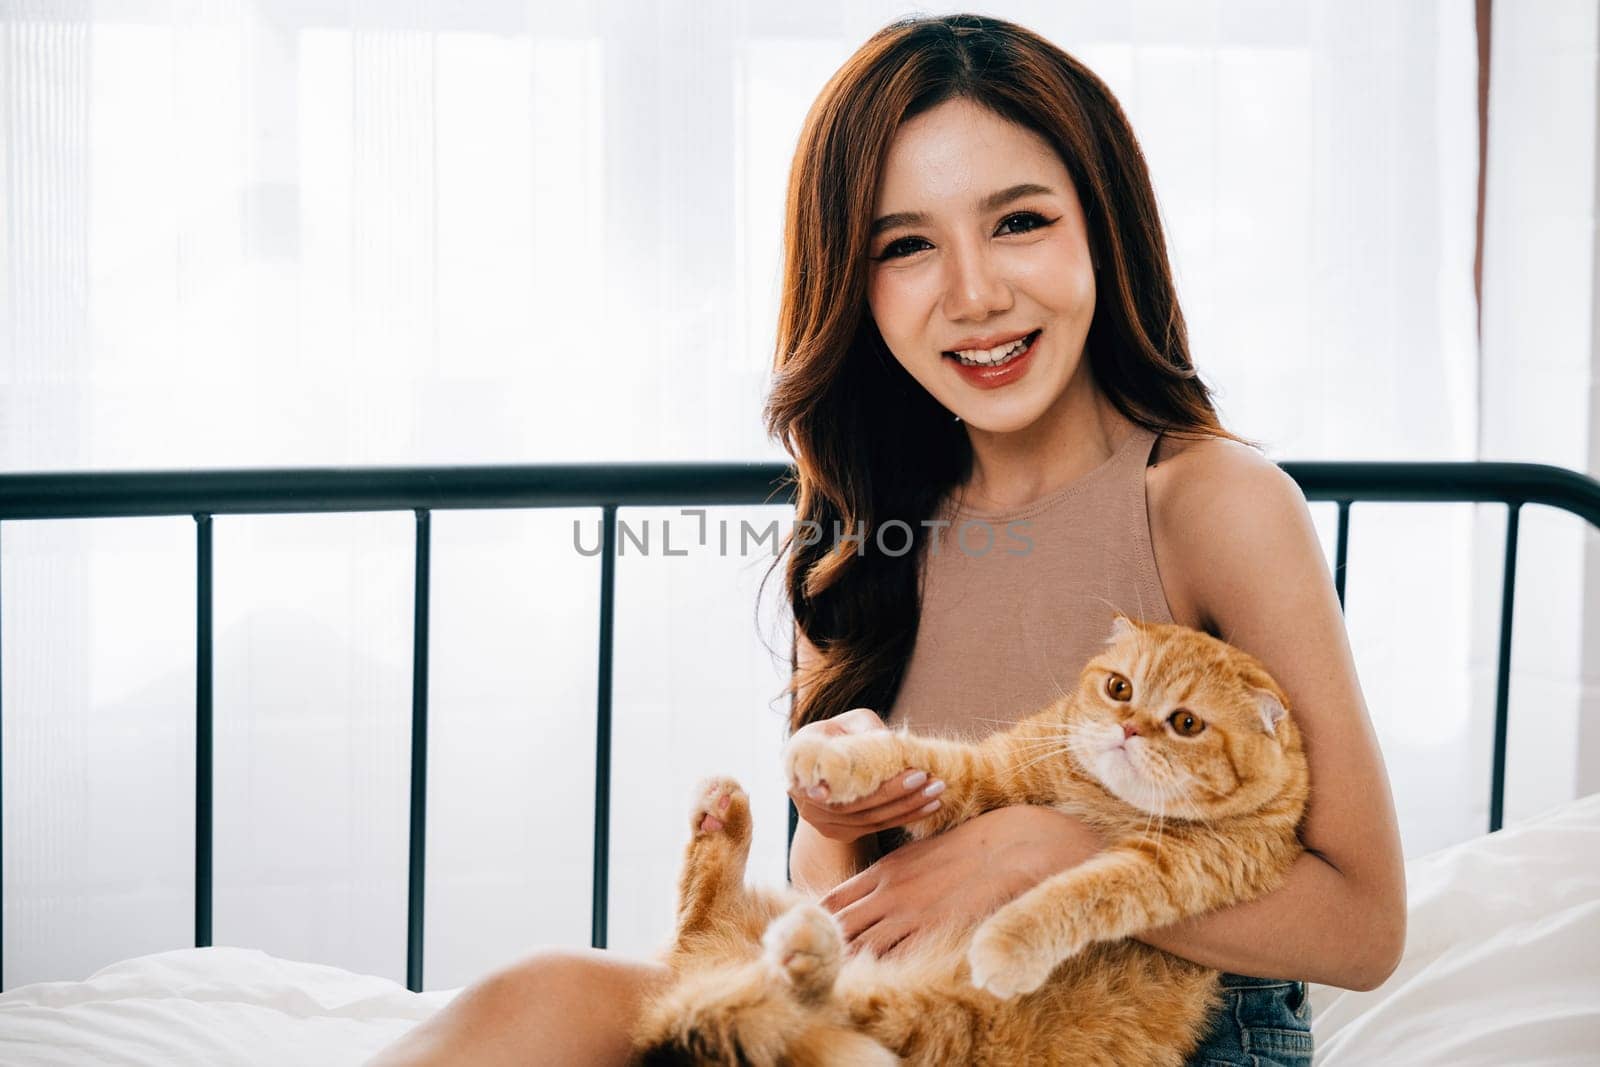 In the bedroom, a young woman smiles with delight while holding her cute Scottish Fold cat, exemplifying the affectionate bond between owner and pet, a portrait of happiness. Pet love